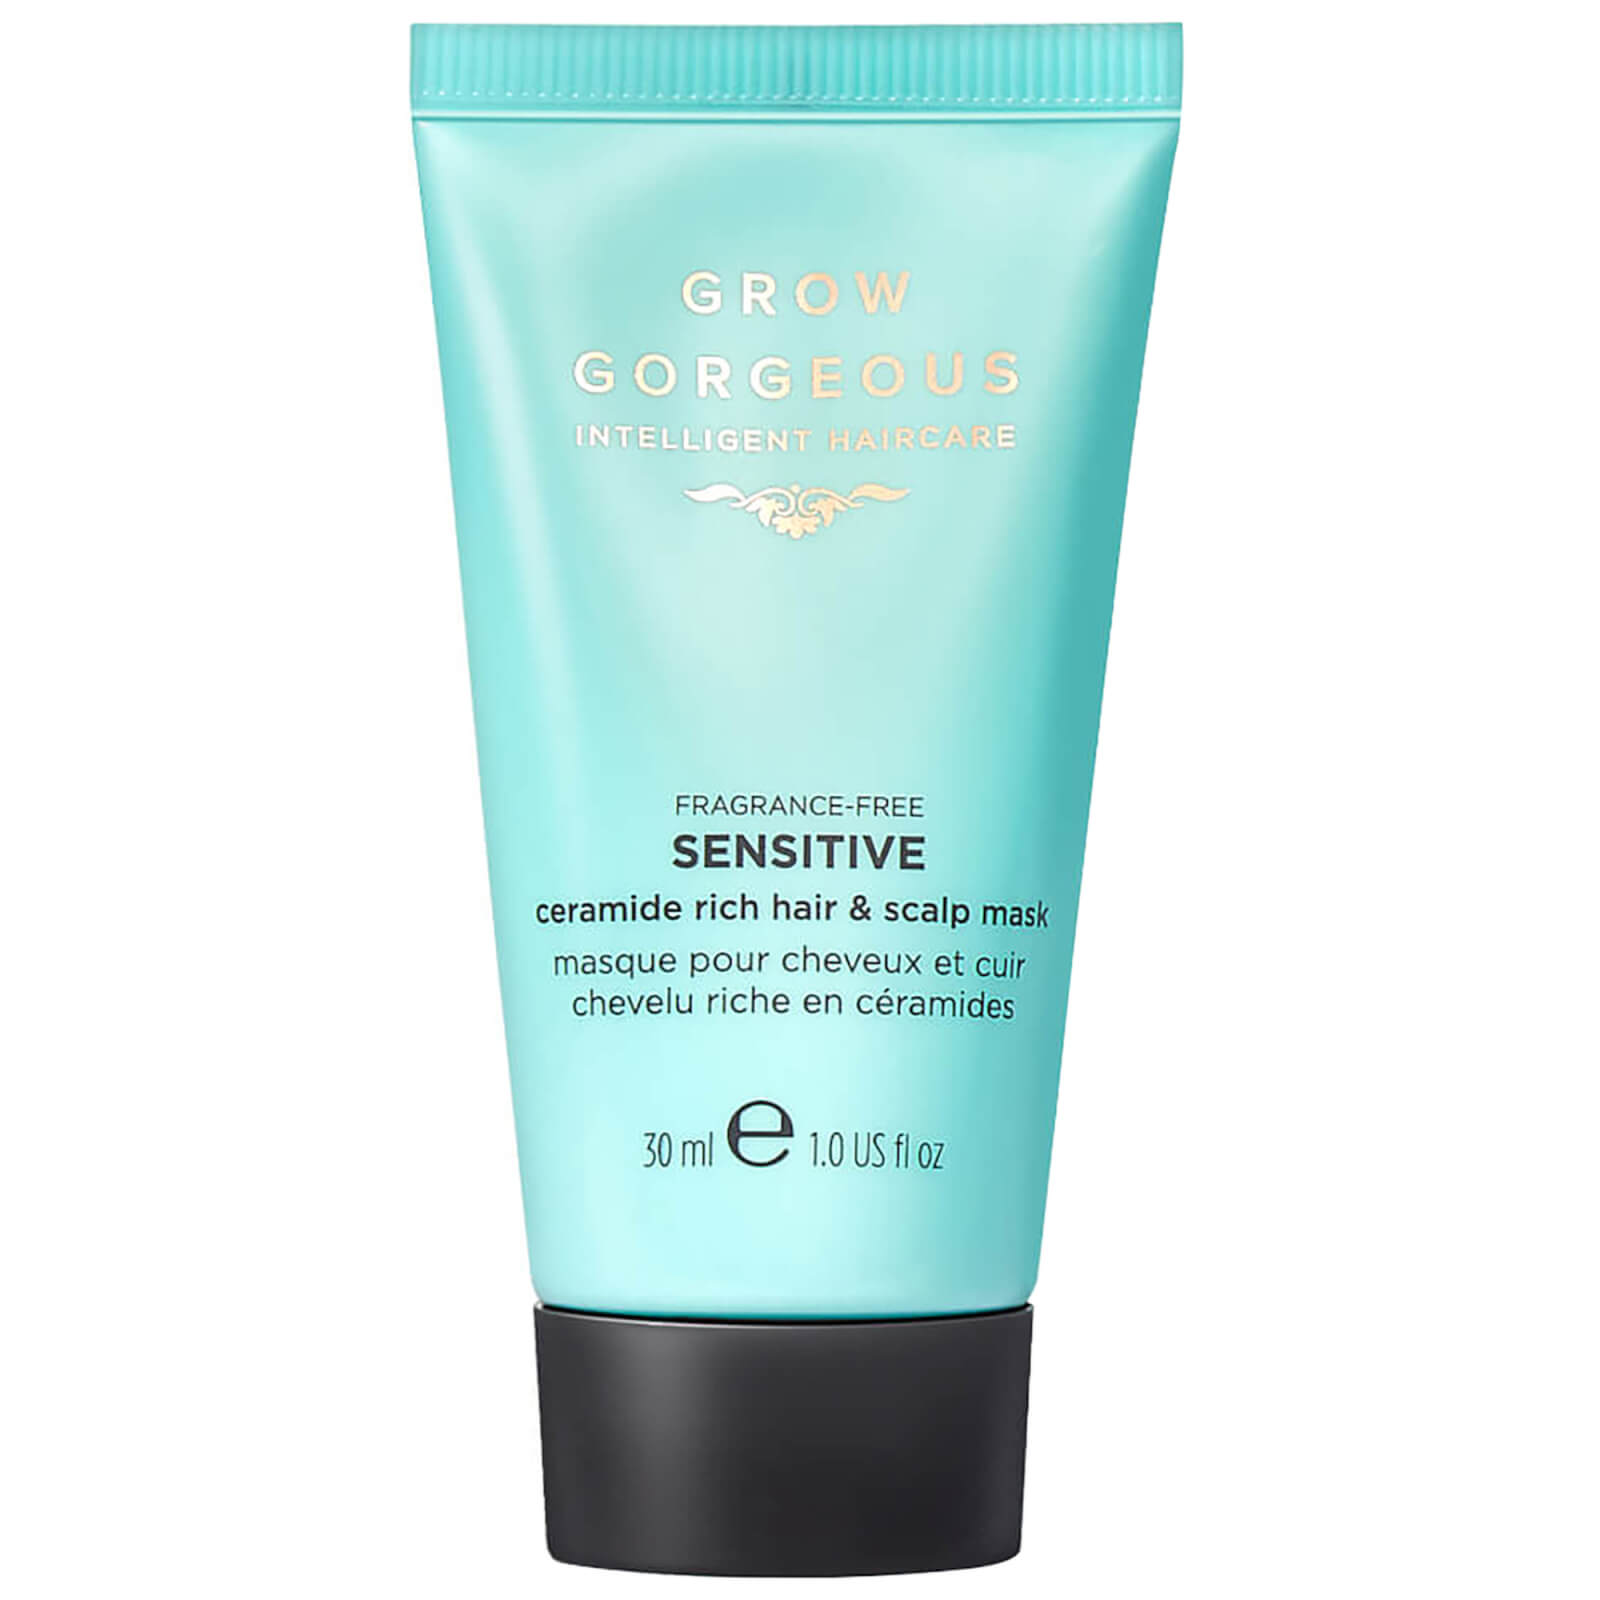 Grow Gorgeous Fragrance-free Sensitive Ceramide Rich Hair And Scalp Mask